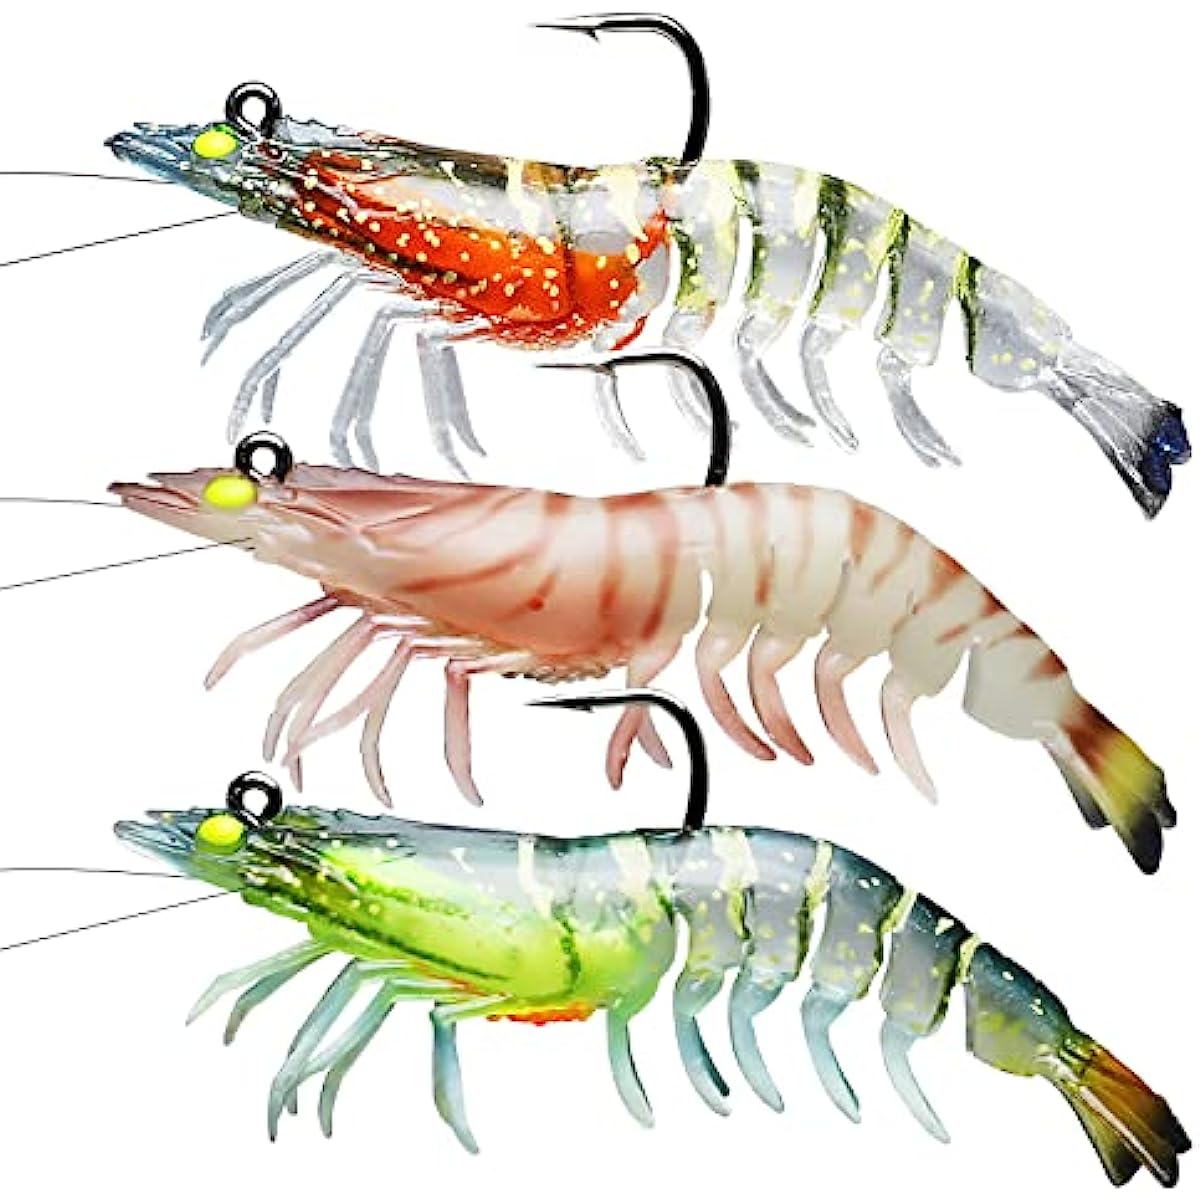 Zerek Jig Head and Weighted Worm Hook Pack for 2 Inch Live Shrimps